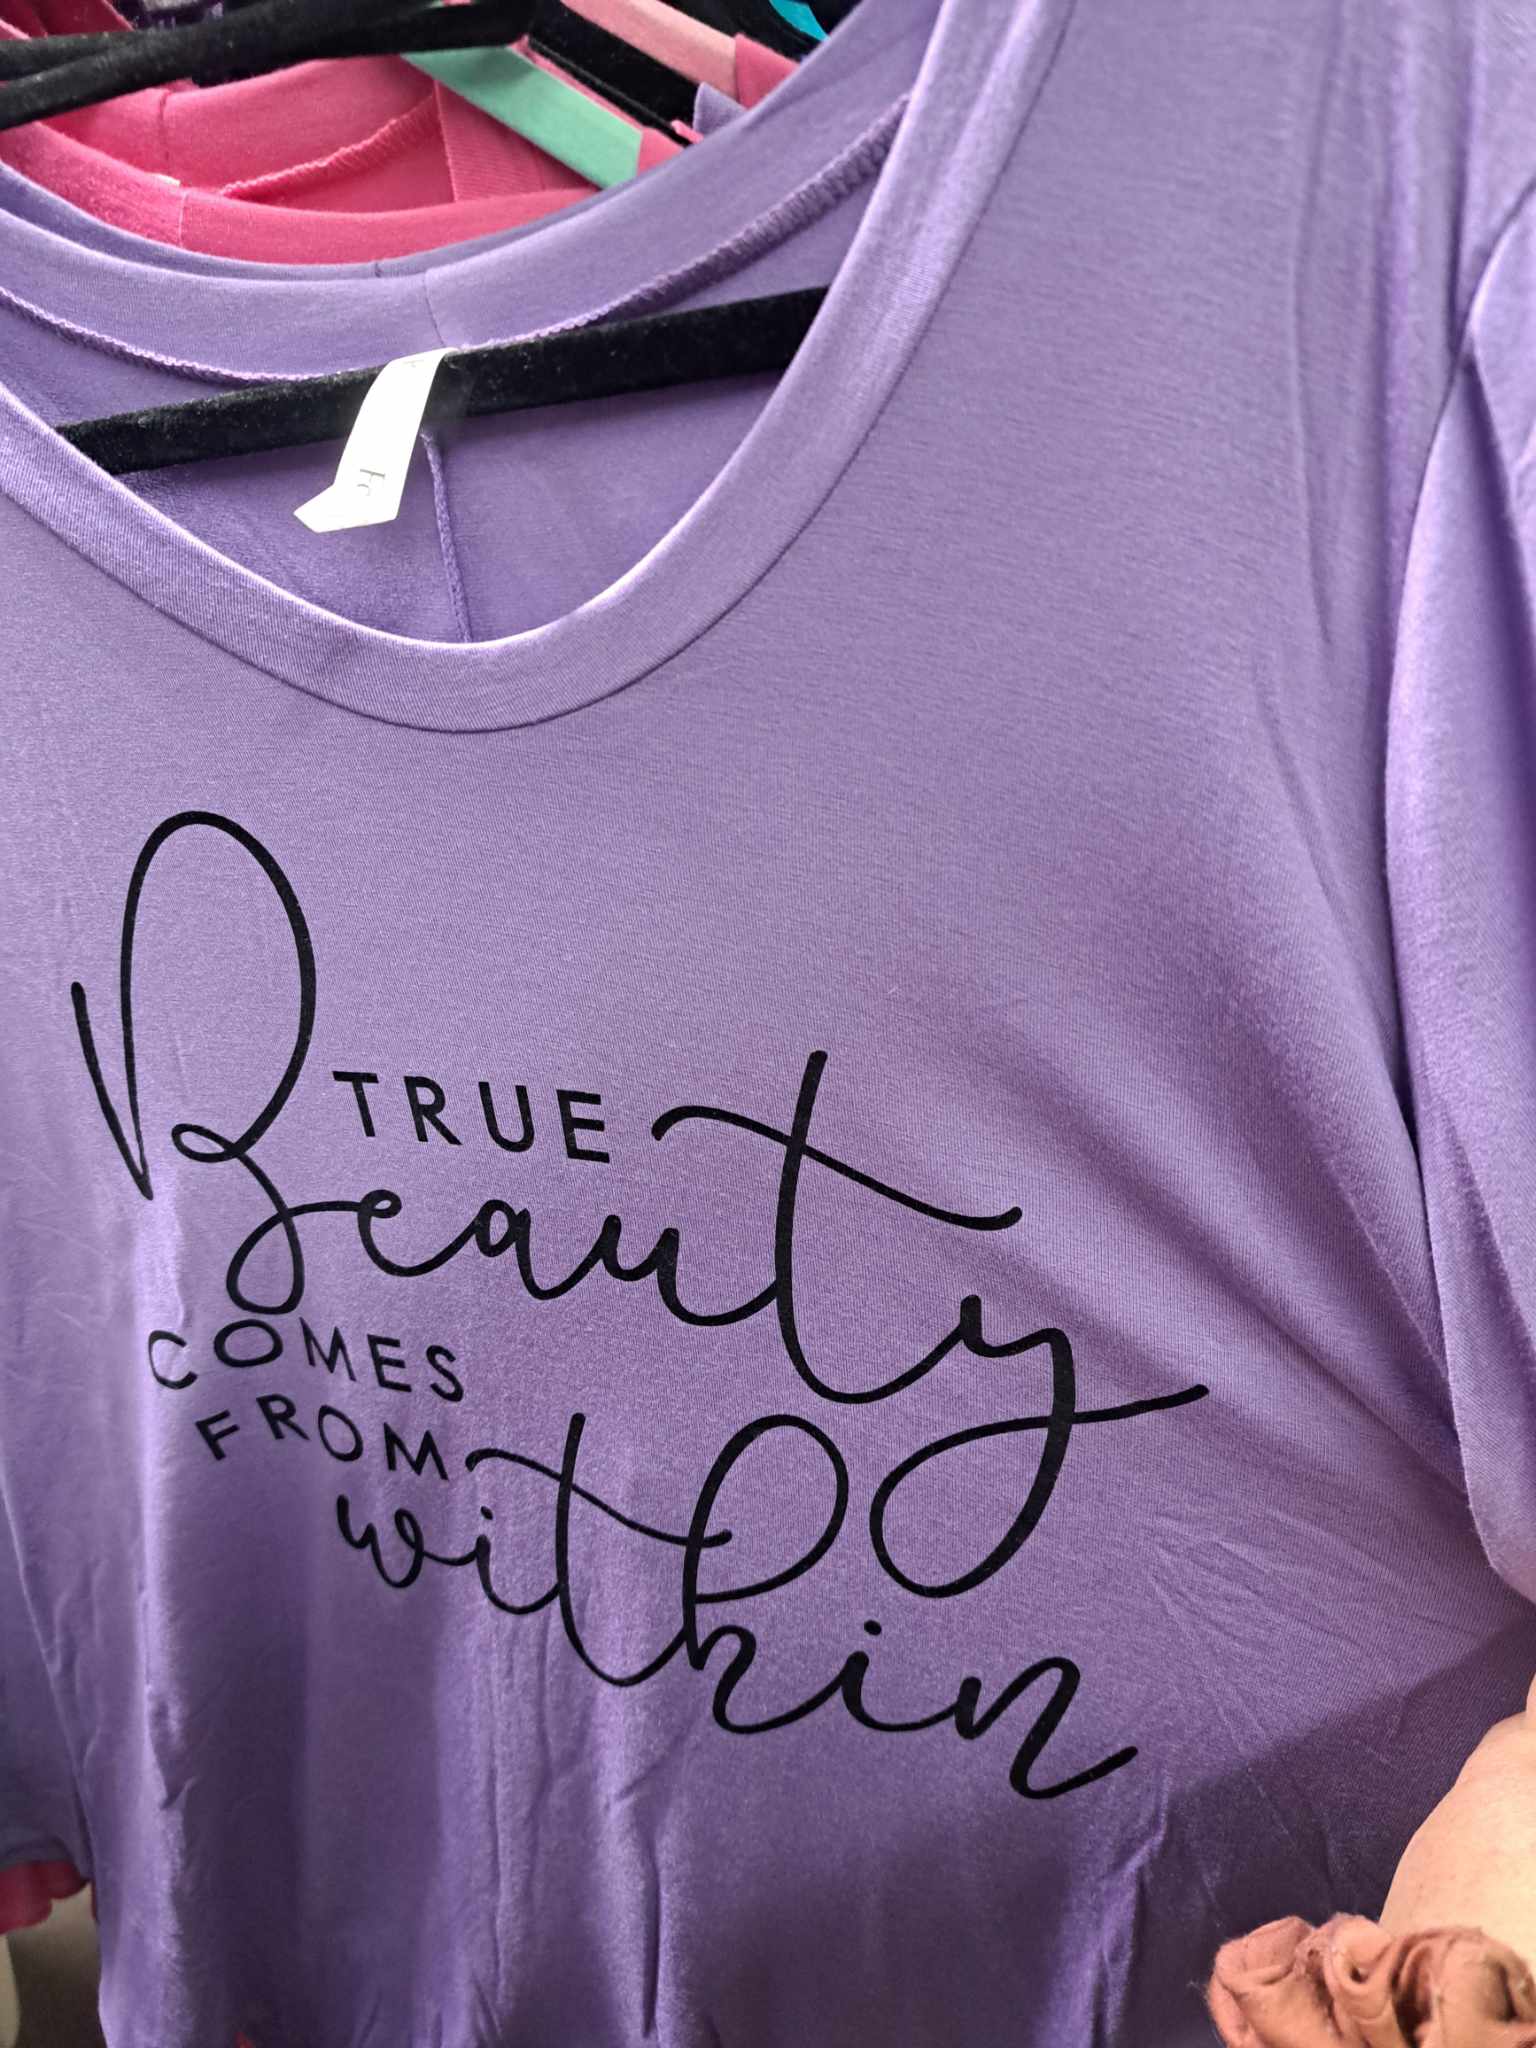 PSFU True Beauty Comes From Within Shirt Top